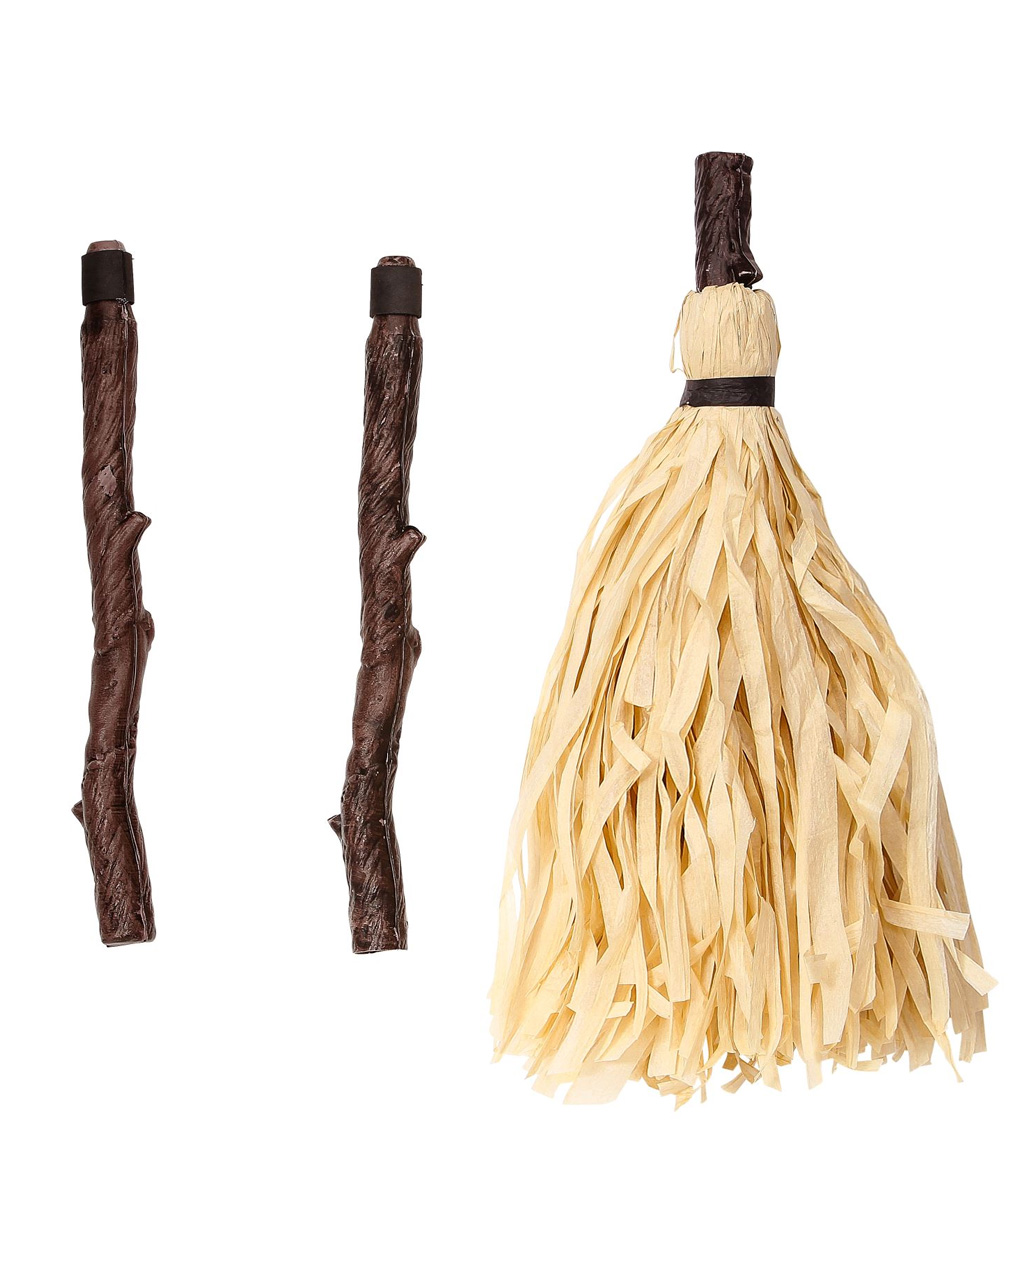 Curved Witches Broom Dismountable 125 Cm for Halloween | Horror-Shop.com